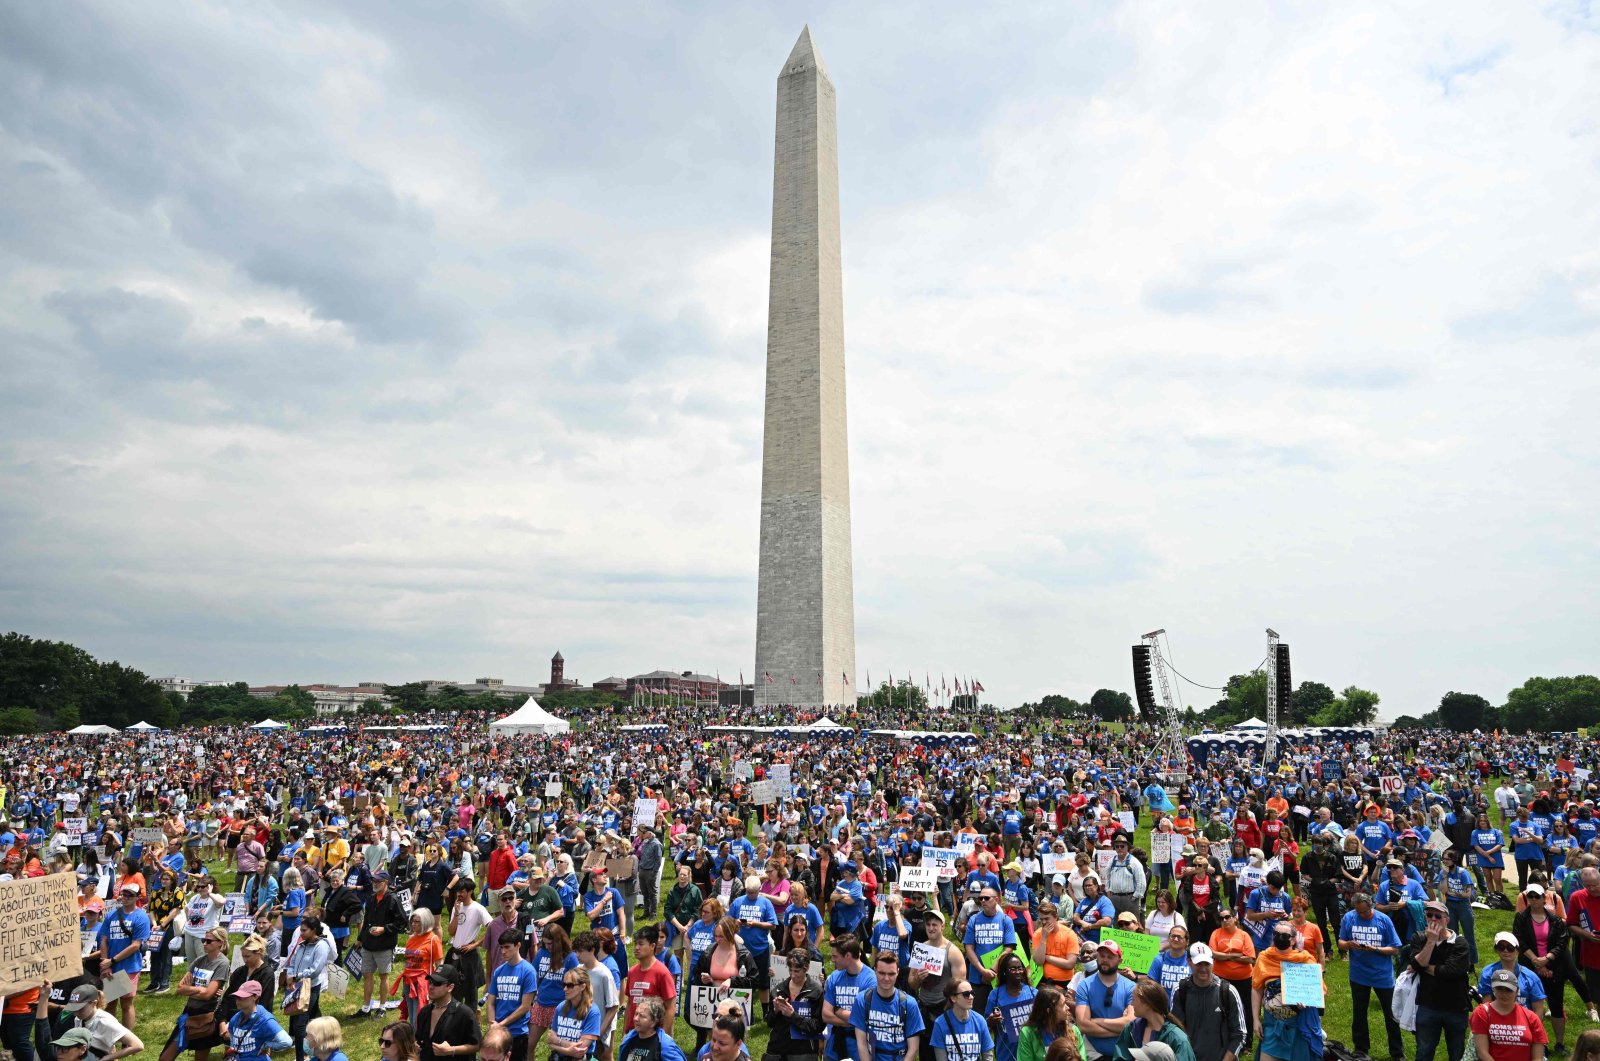 Thousands of gun control advocates join the "March for Our Lives" as they protest against gun violence during a rally near the Washington Monument on the National Mall in Washington, D.C., U.S., June 11, 2022. (AFP Photo)